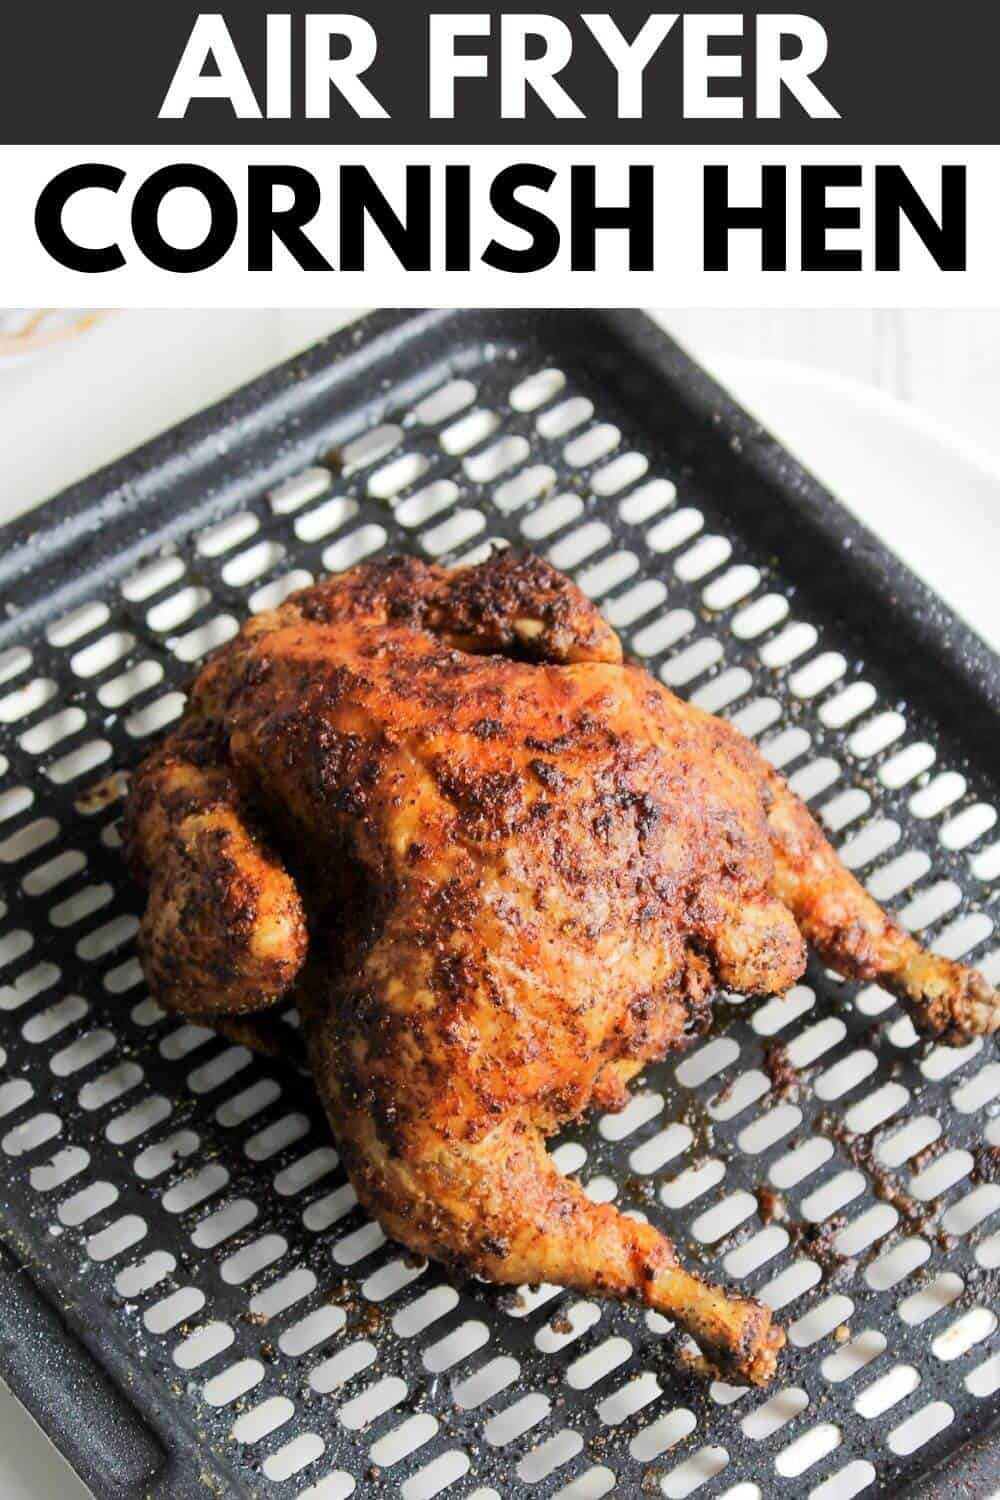 Air fryer cornish hen with recipe title text overlay.